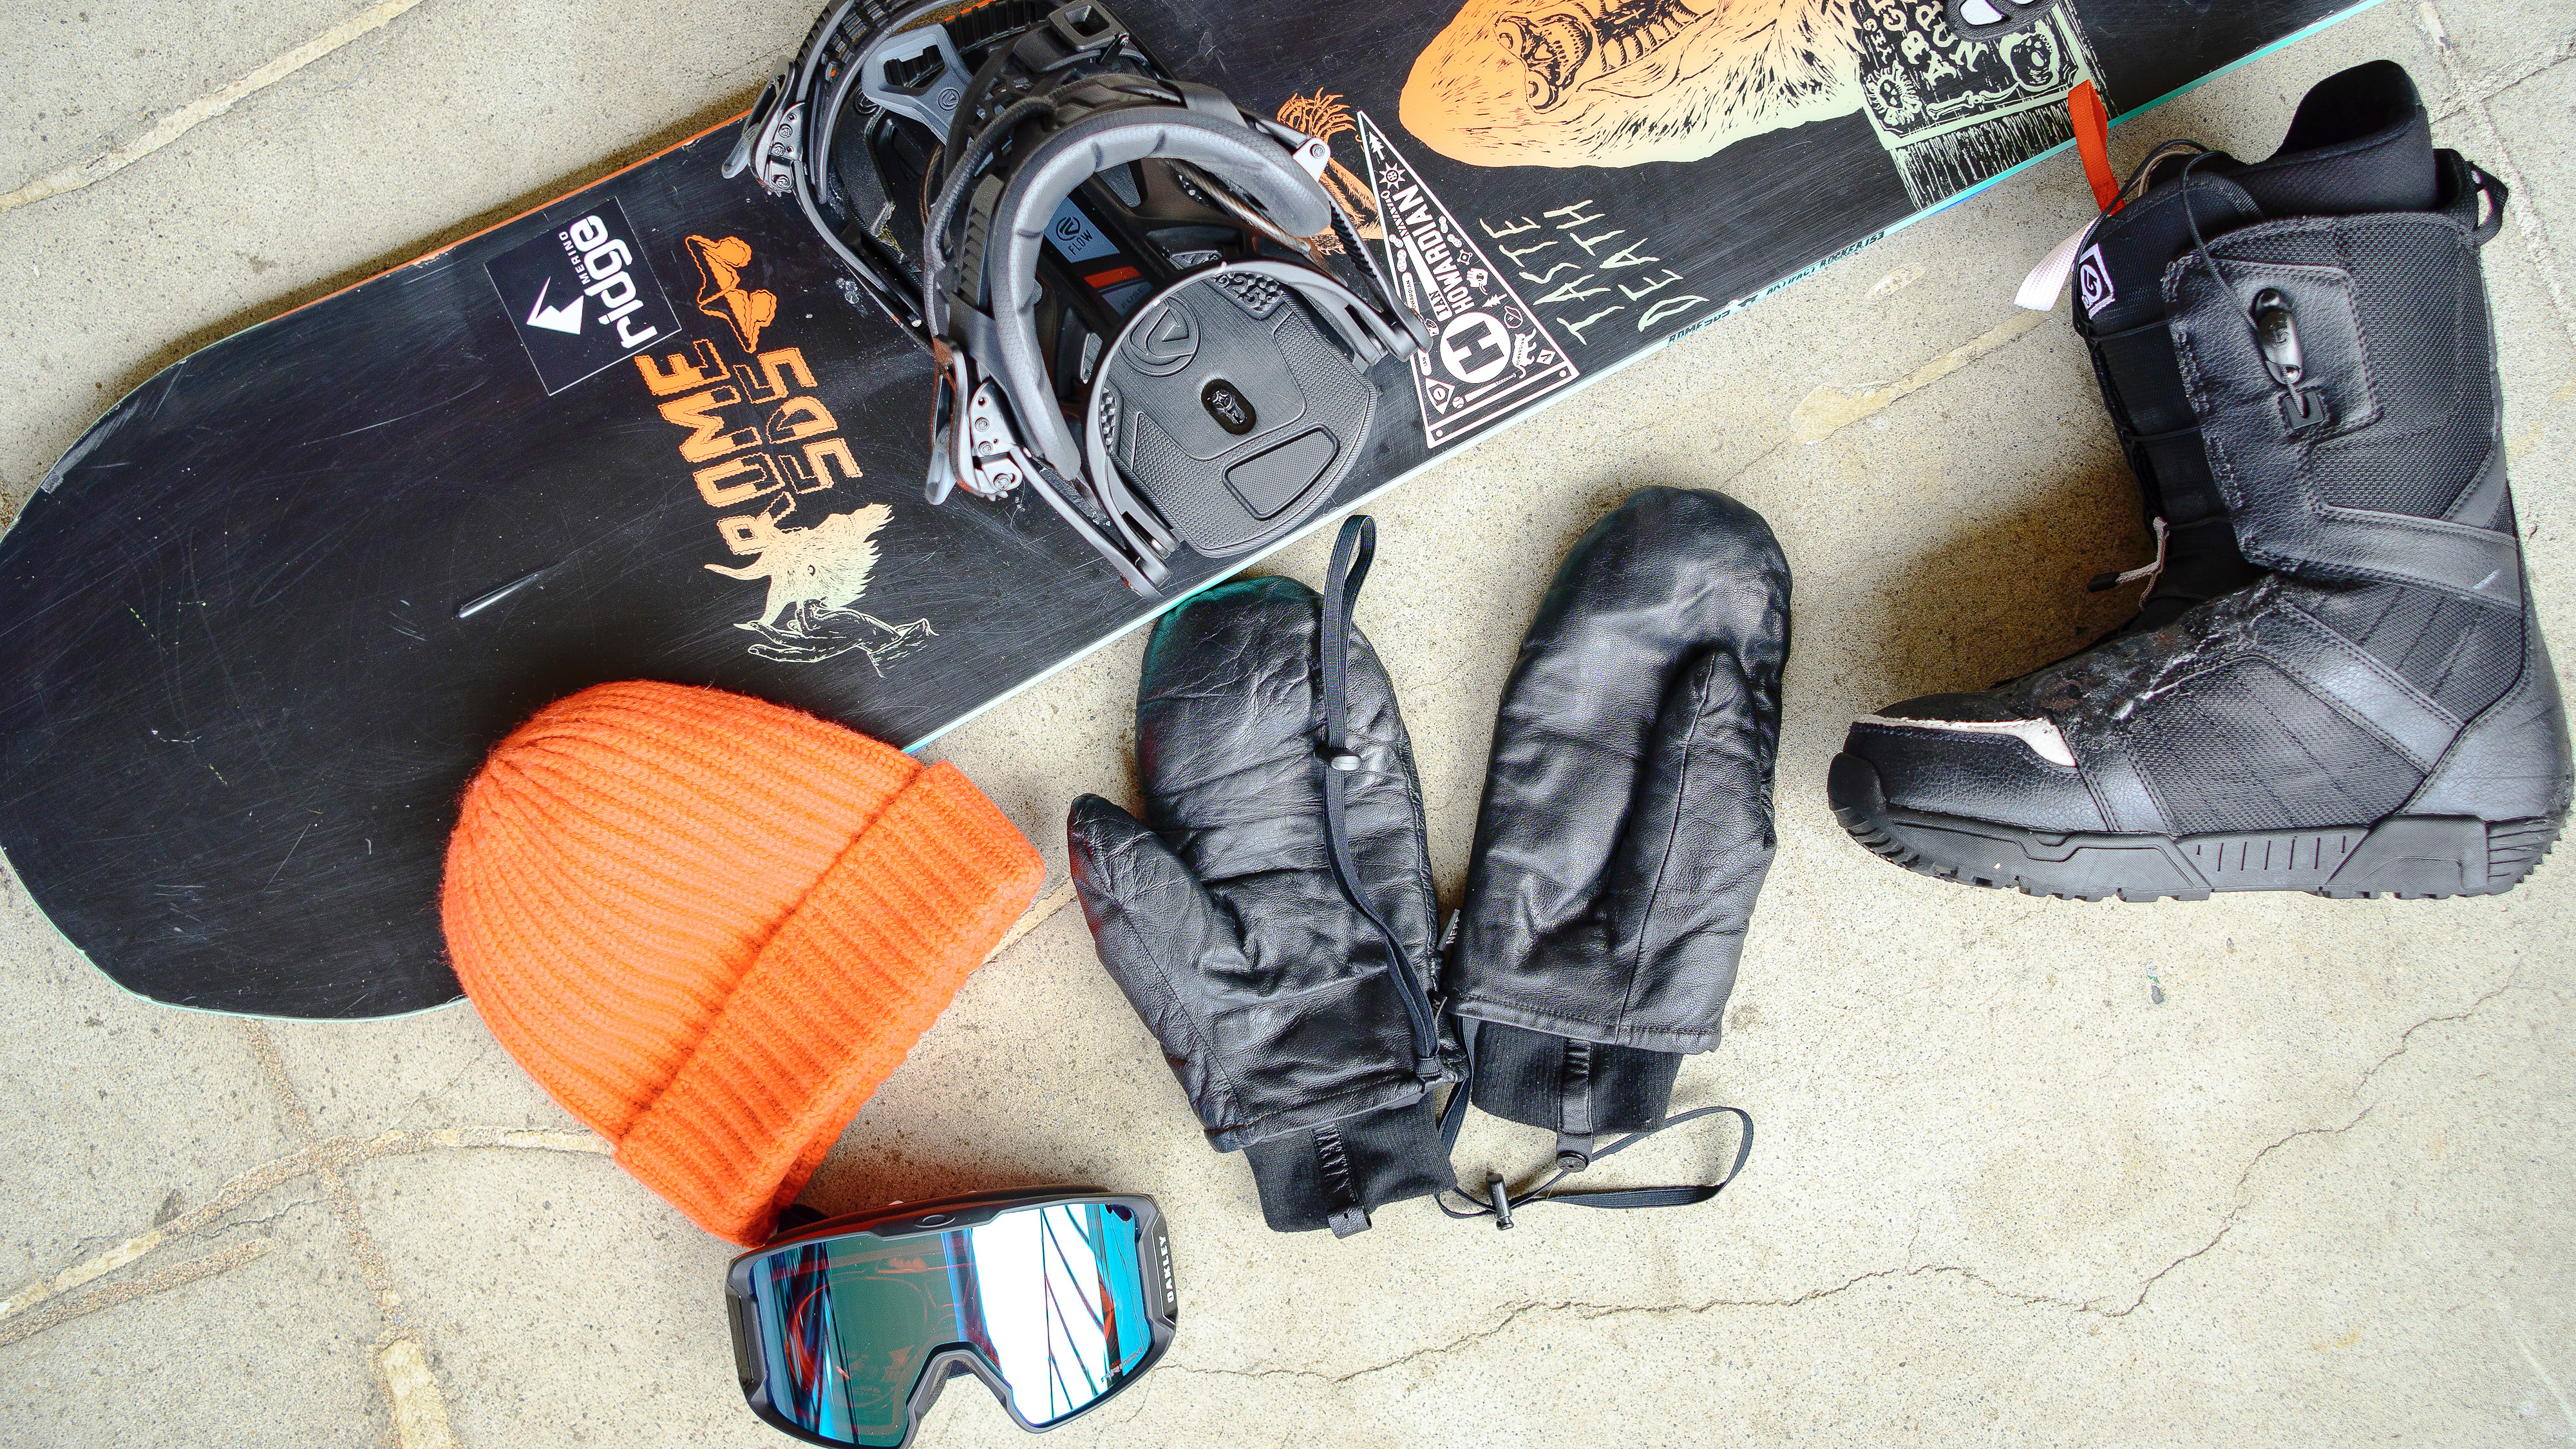 How to store ski and snowboard gear for the offseason, including boards, skis, helmets, soft goods and more.